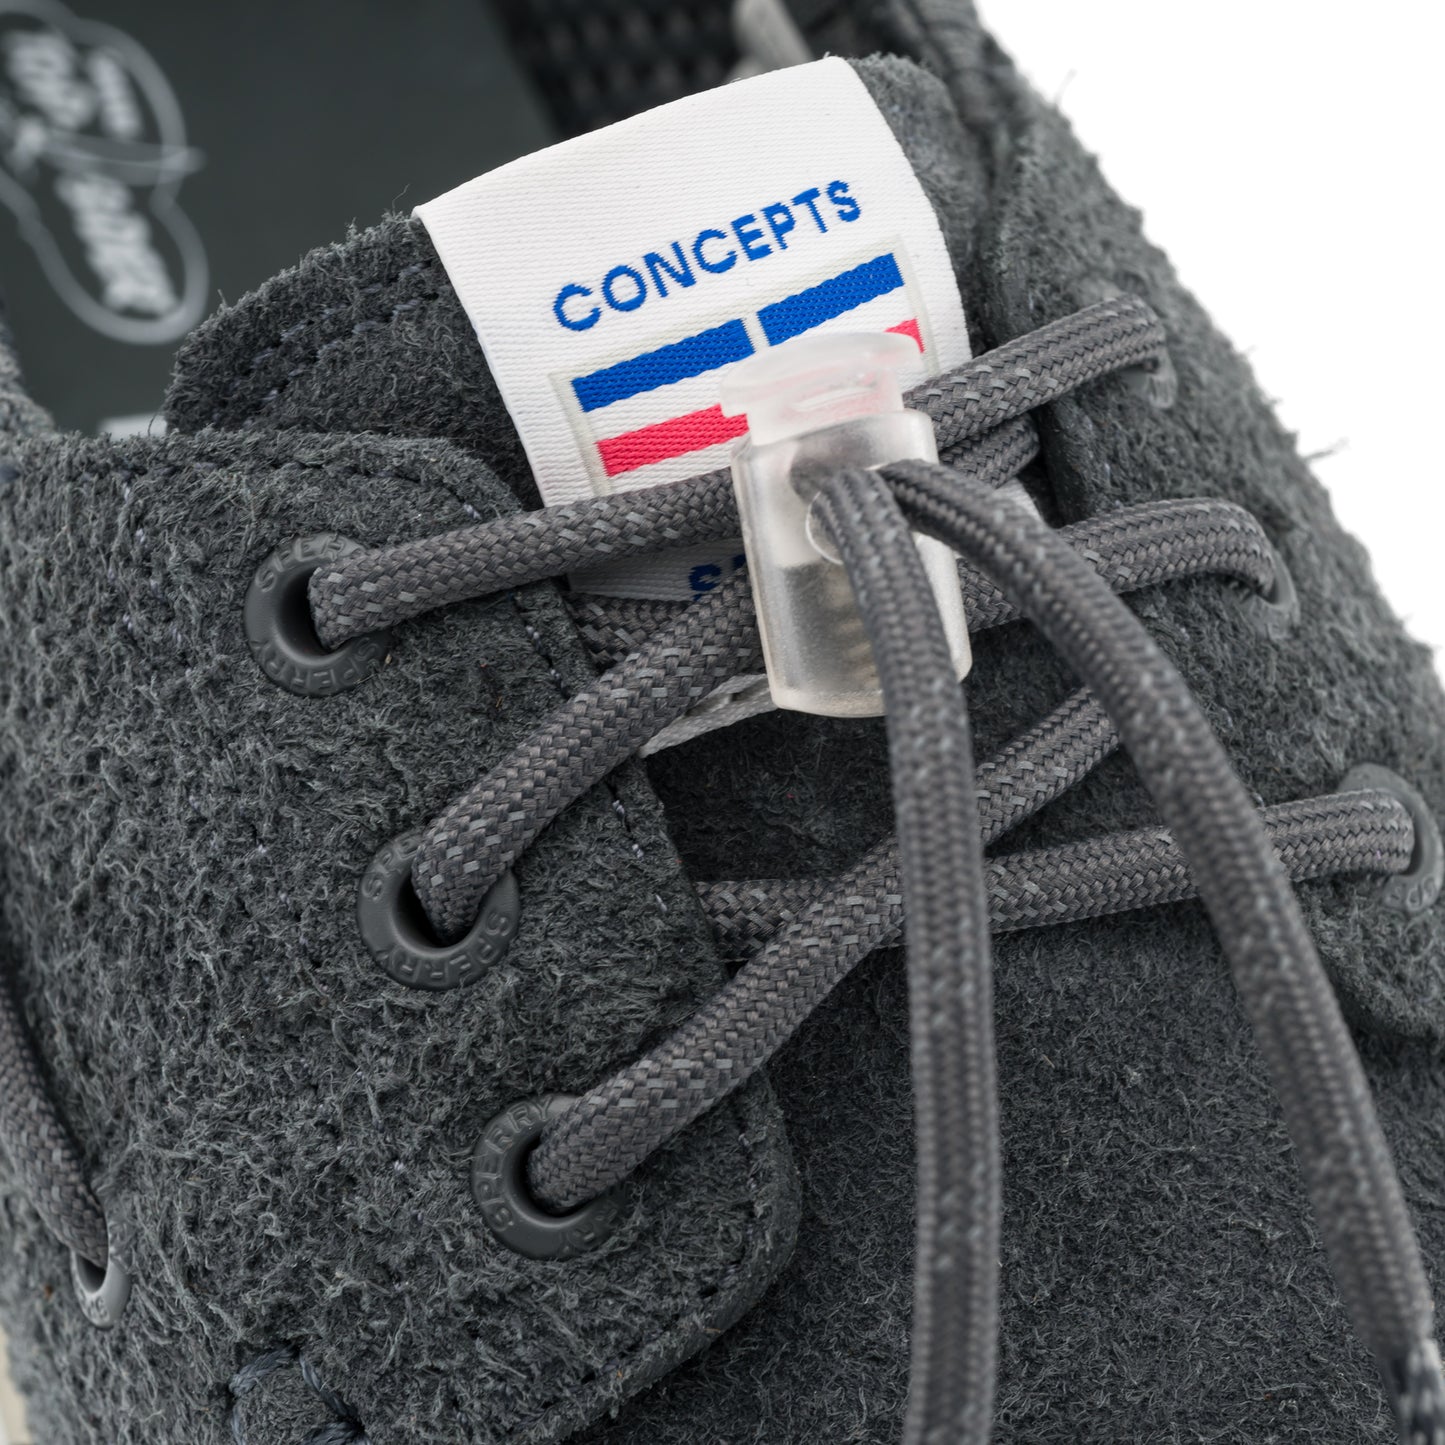 CNCPTS x Sperry Authentic Original 3-Eye Cup (Ash)